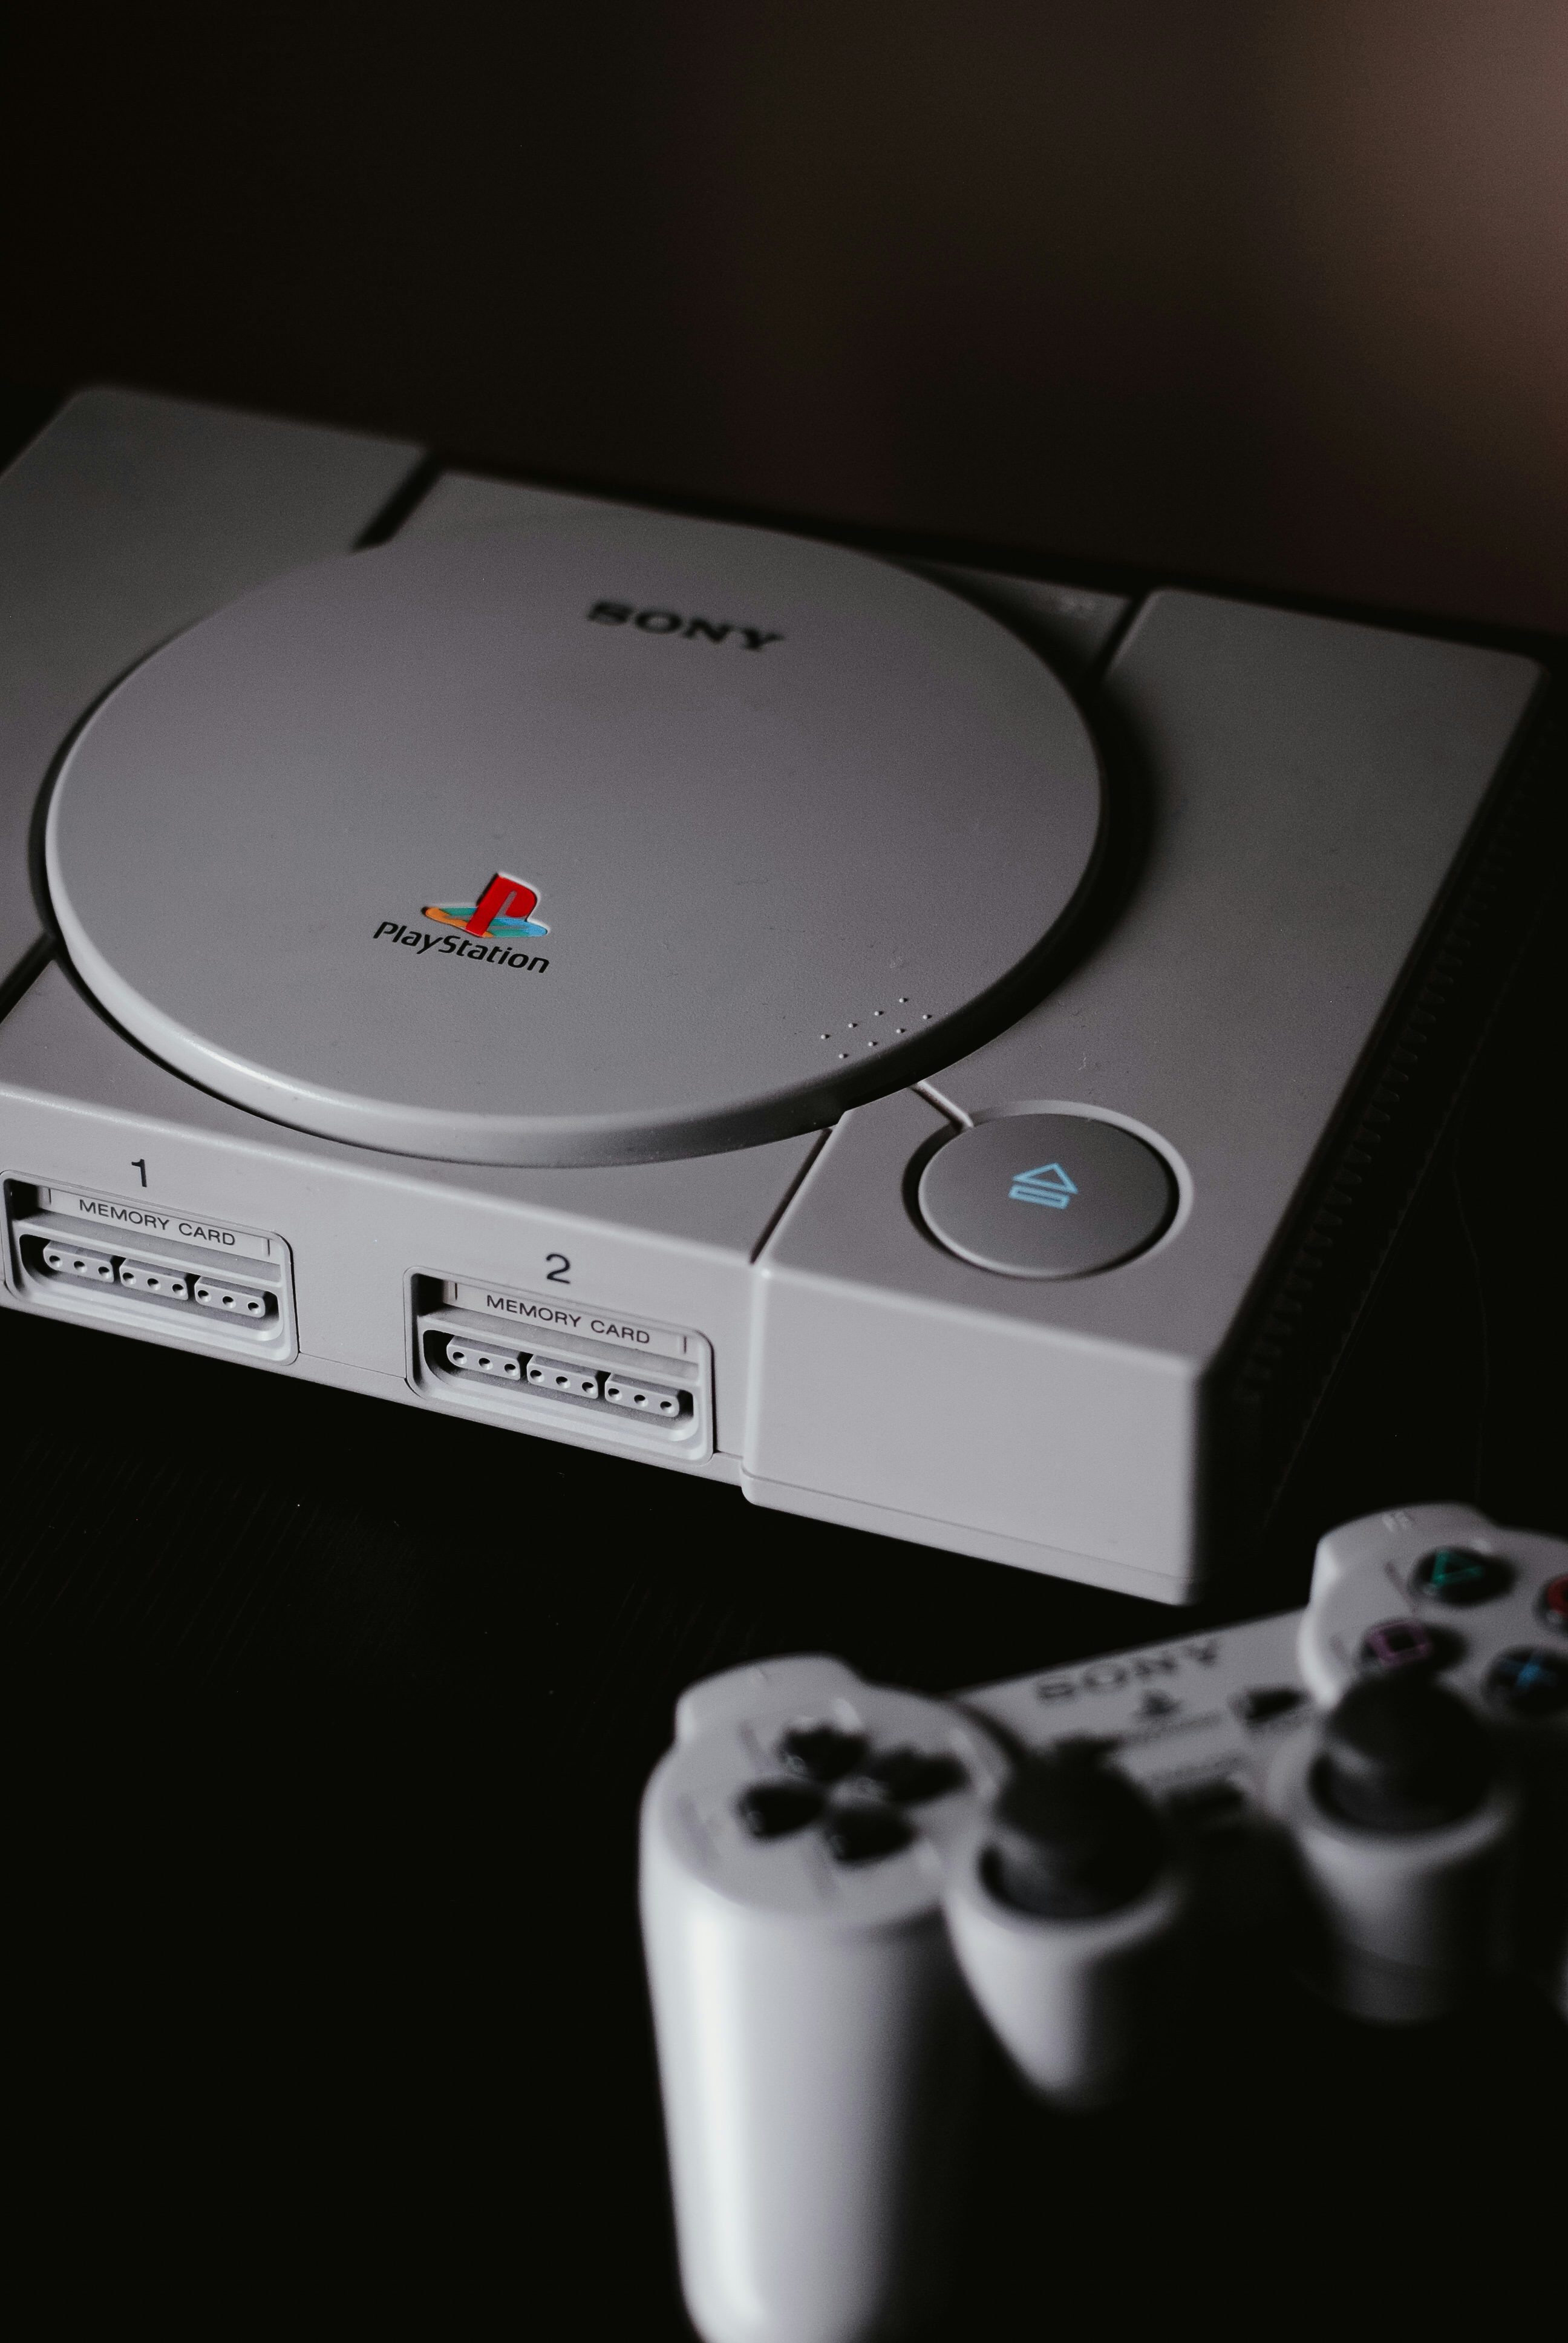 Sony playstation когда вышла. Sony ps1. Sony PLAYSTATION 1. Sony PLAYSTATION 1 one. Sony PLAYSTATION ps1.